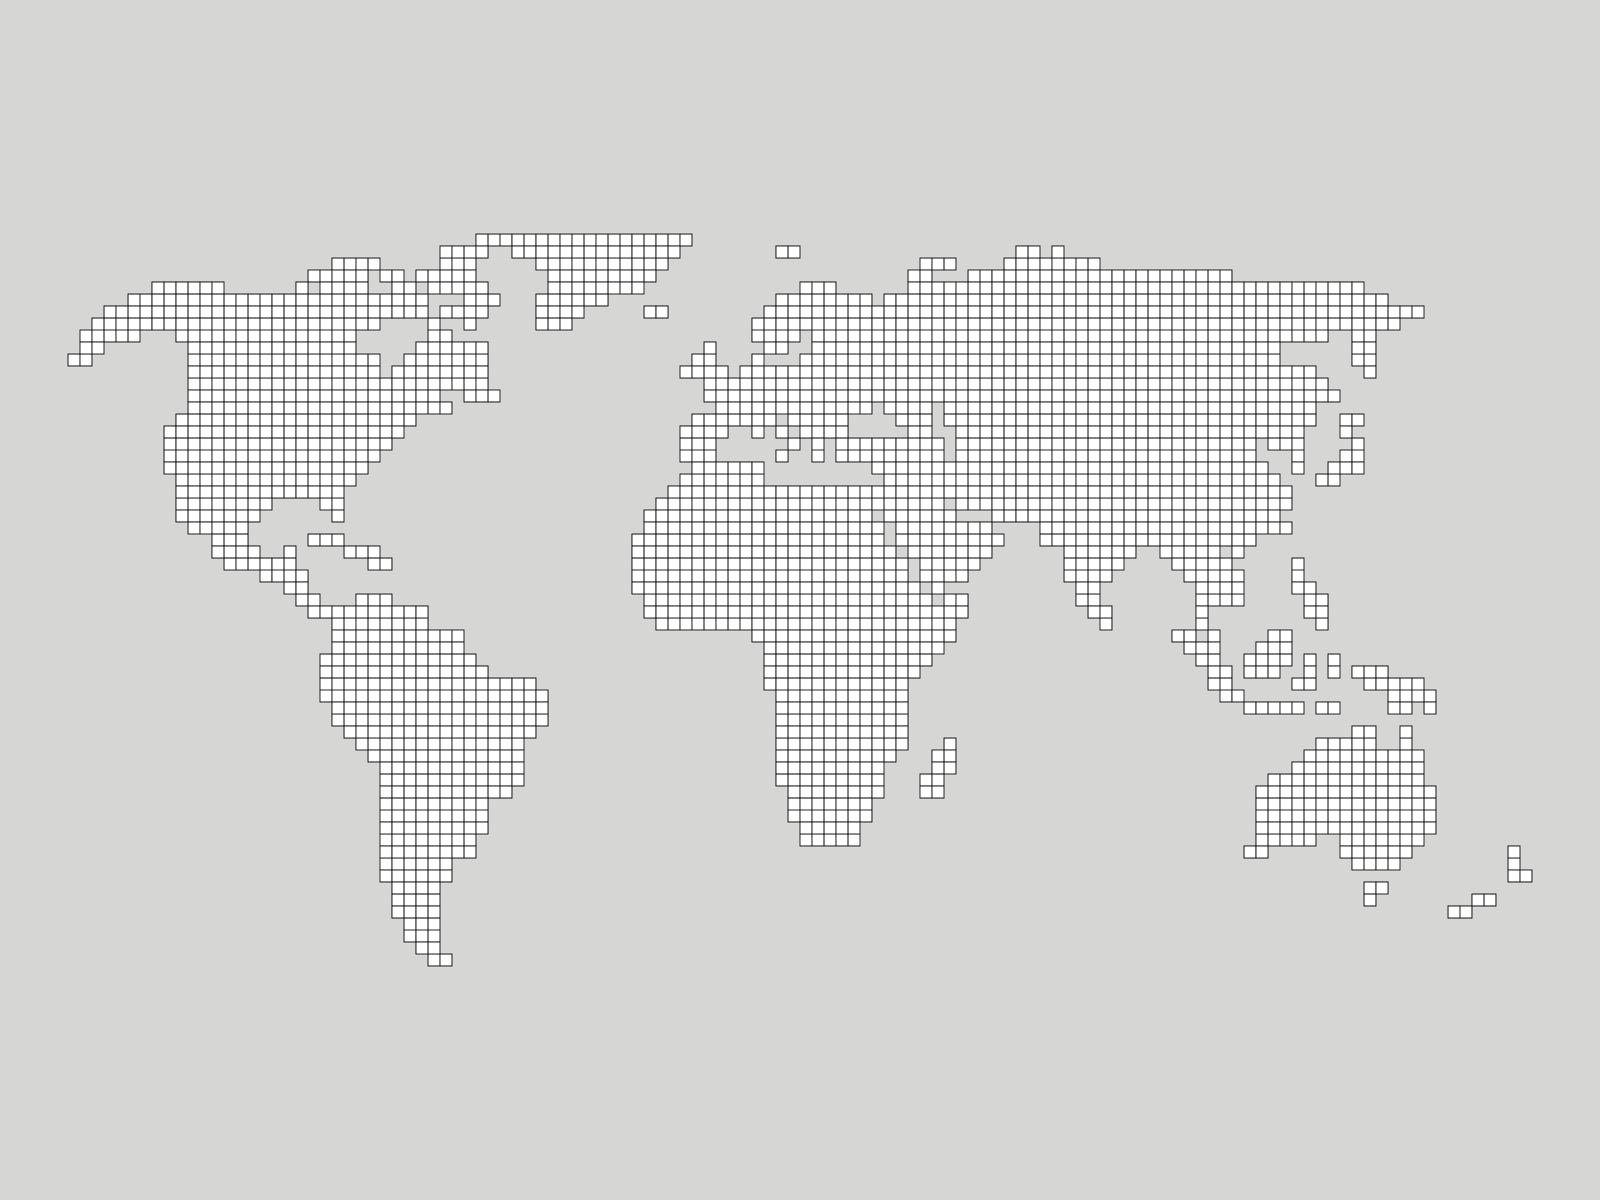 World map grid - tiled by small squares with black outline and white fill on grey background.